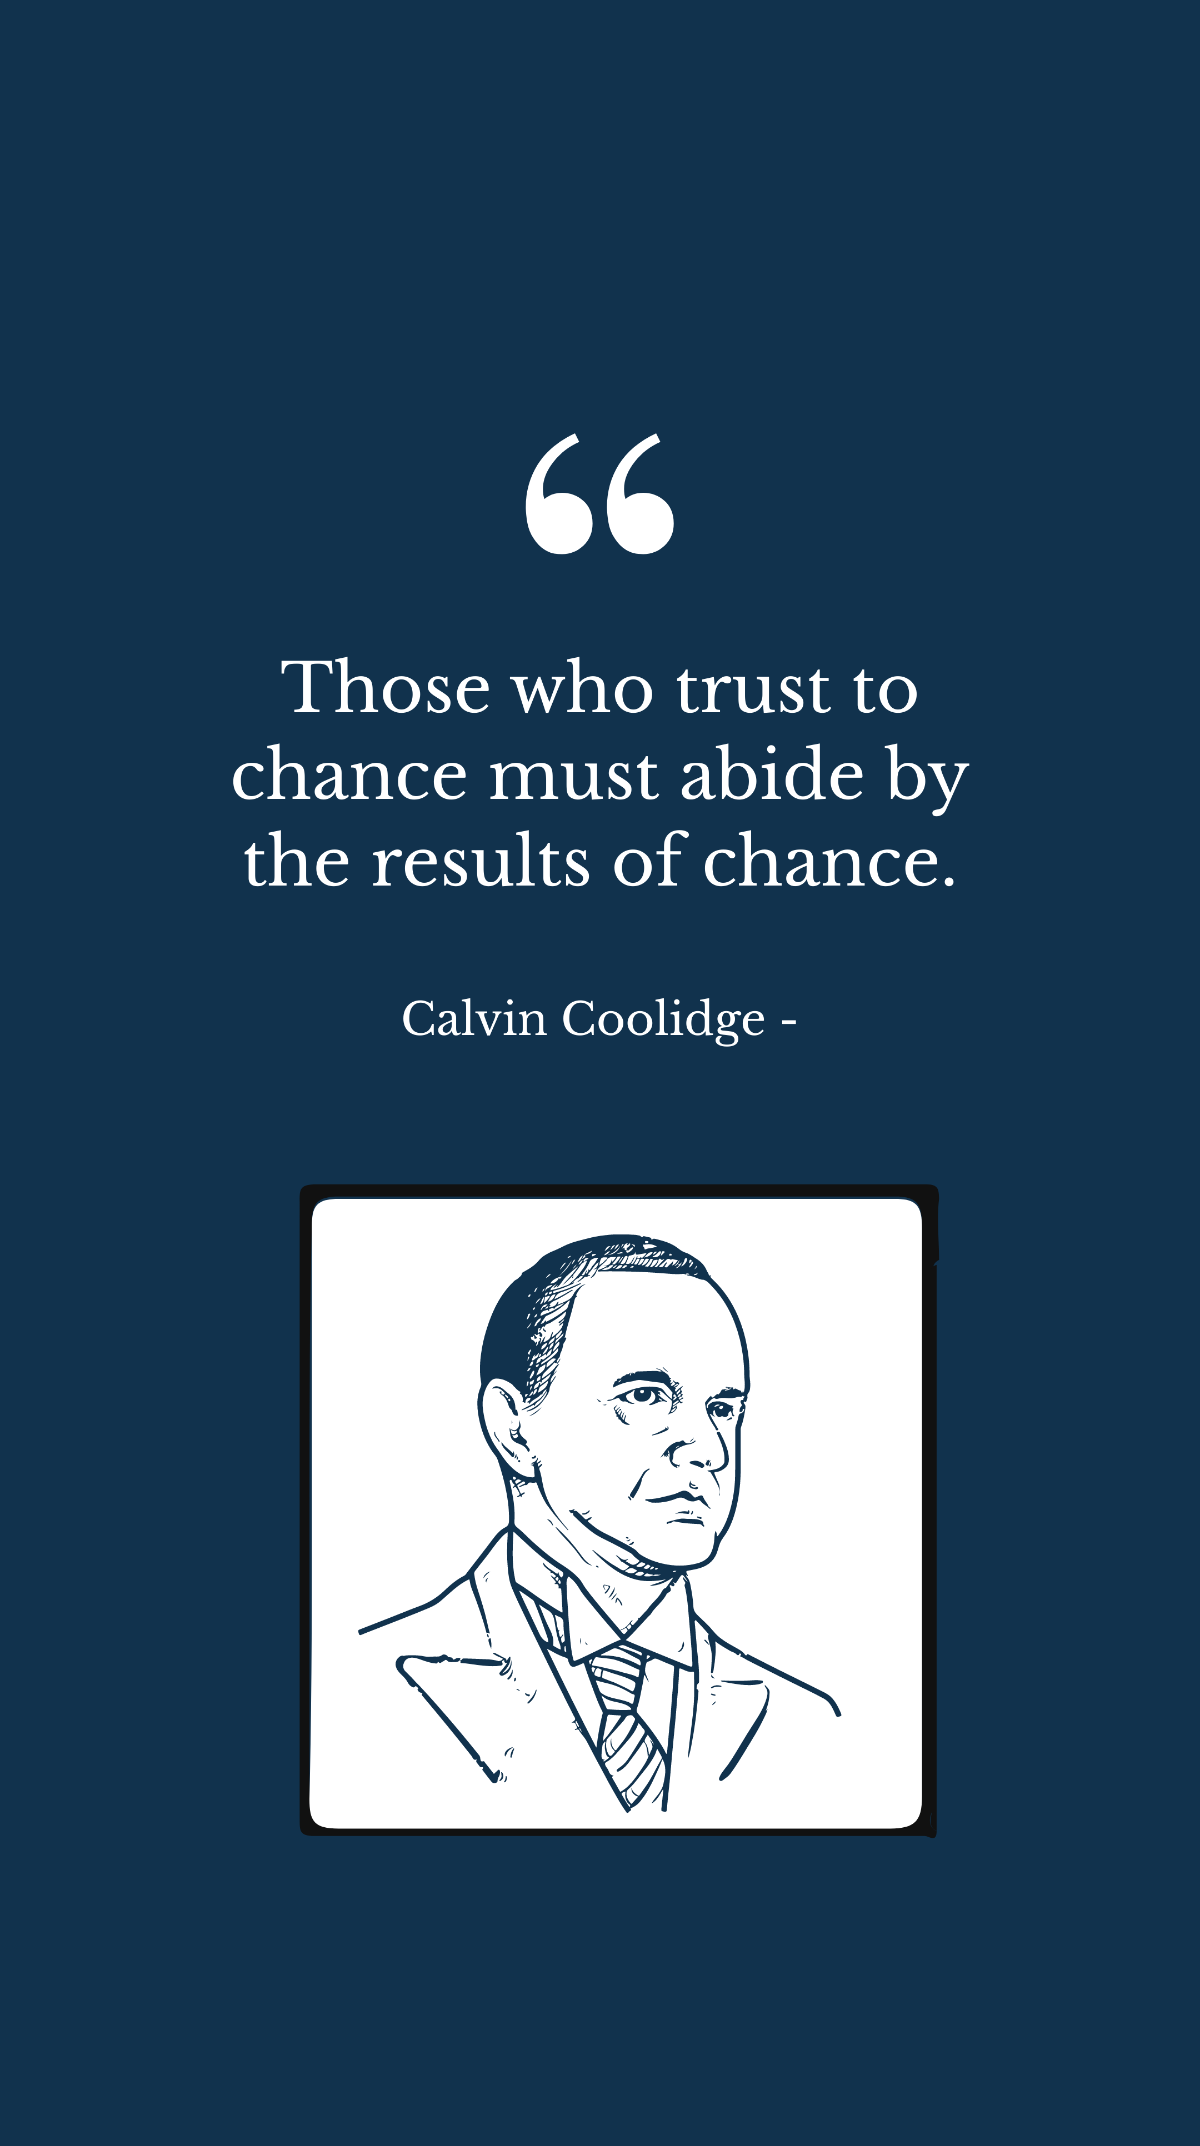 Calvin Coolidge - Those who trust to chance must abide by the results of chance. Template